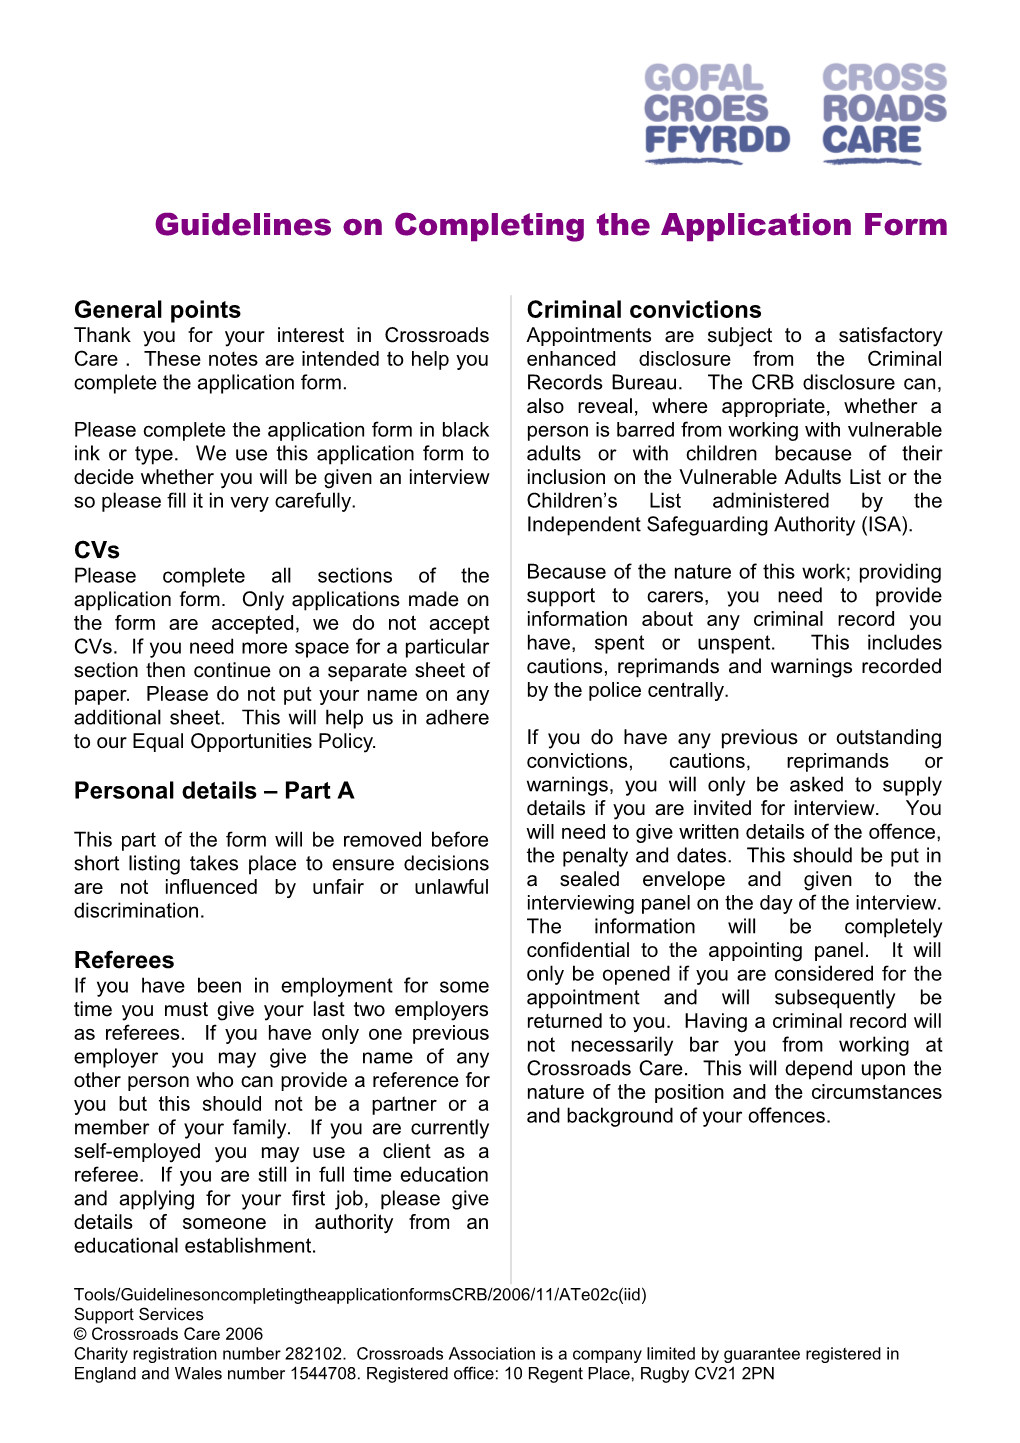 Notes on Completing the Application Form